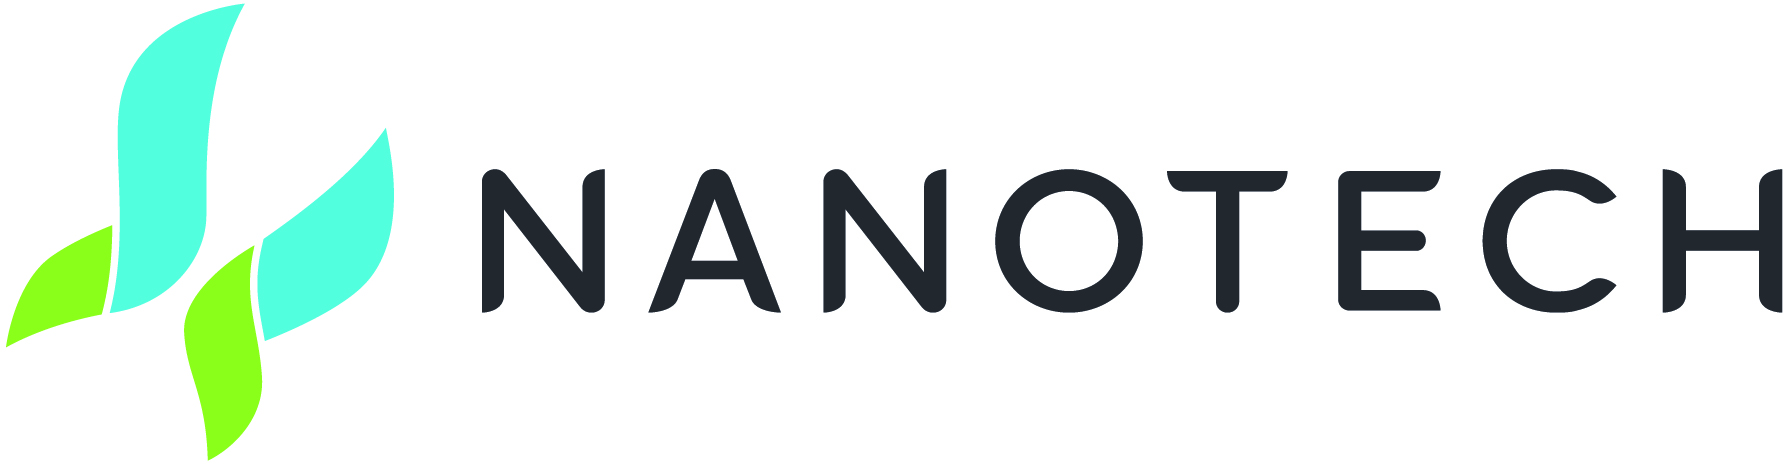 Nanotech Secures Multi-year Brand Protection Contract with CONCACAF image